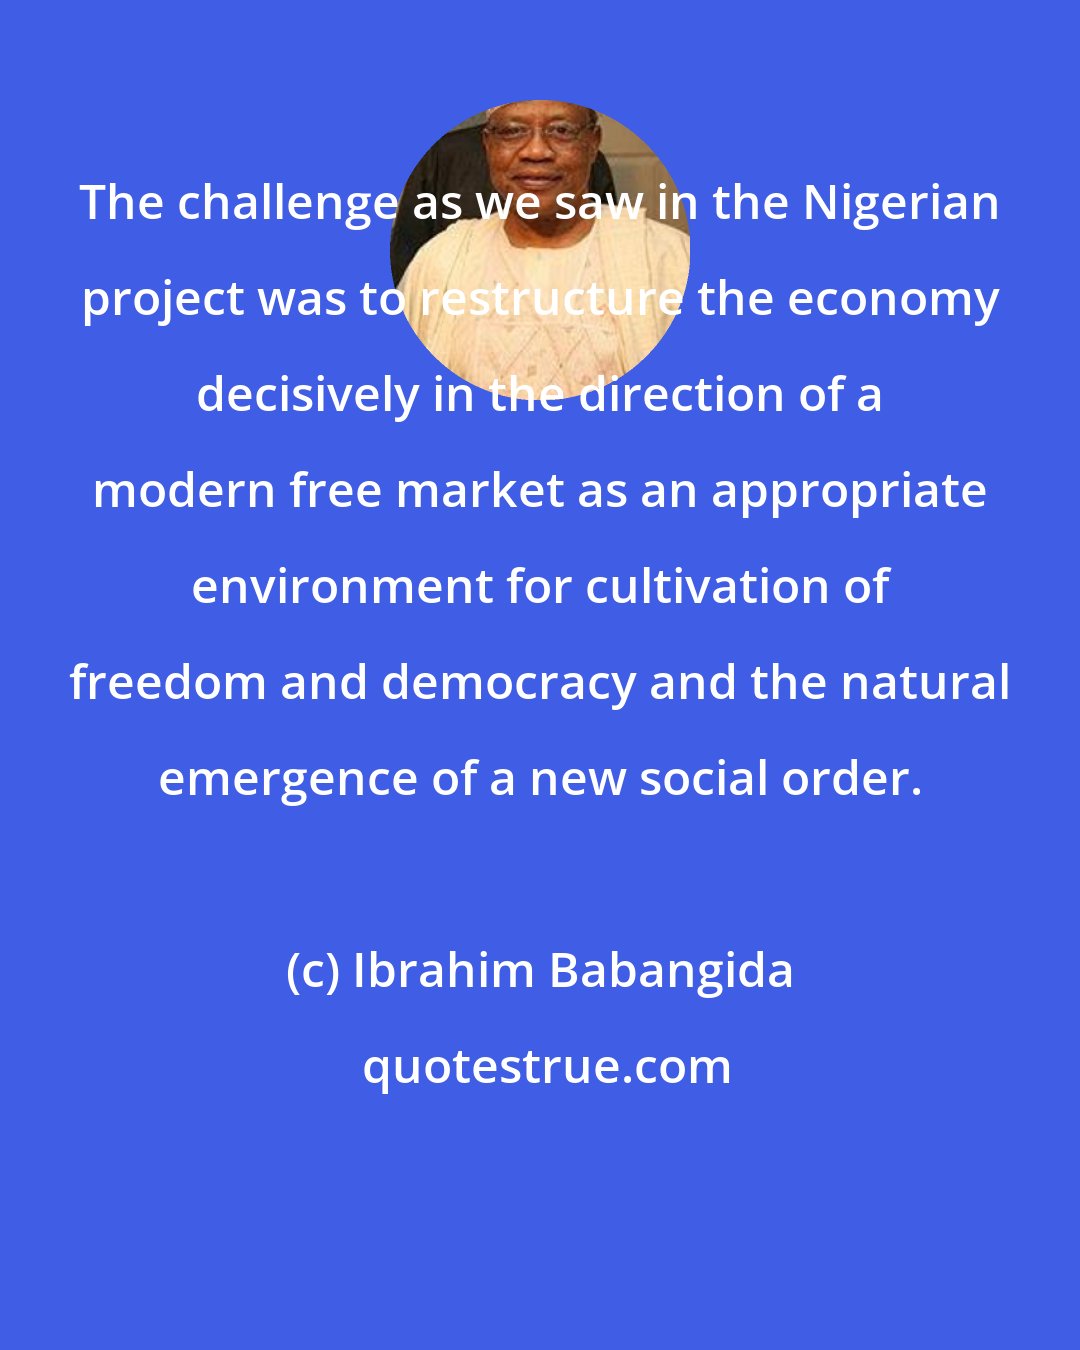 Ibrahim Babangida: The challenge as we saw in the Nigerian project was to restructure the economy decisively in the direction of a modern free market as an appropriate environment for cultivation of freedom and democracy and the natural emergence of a new social order.